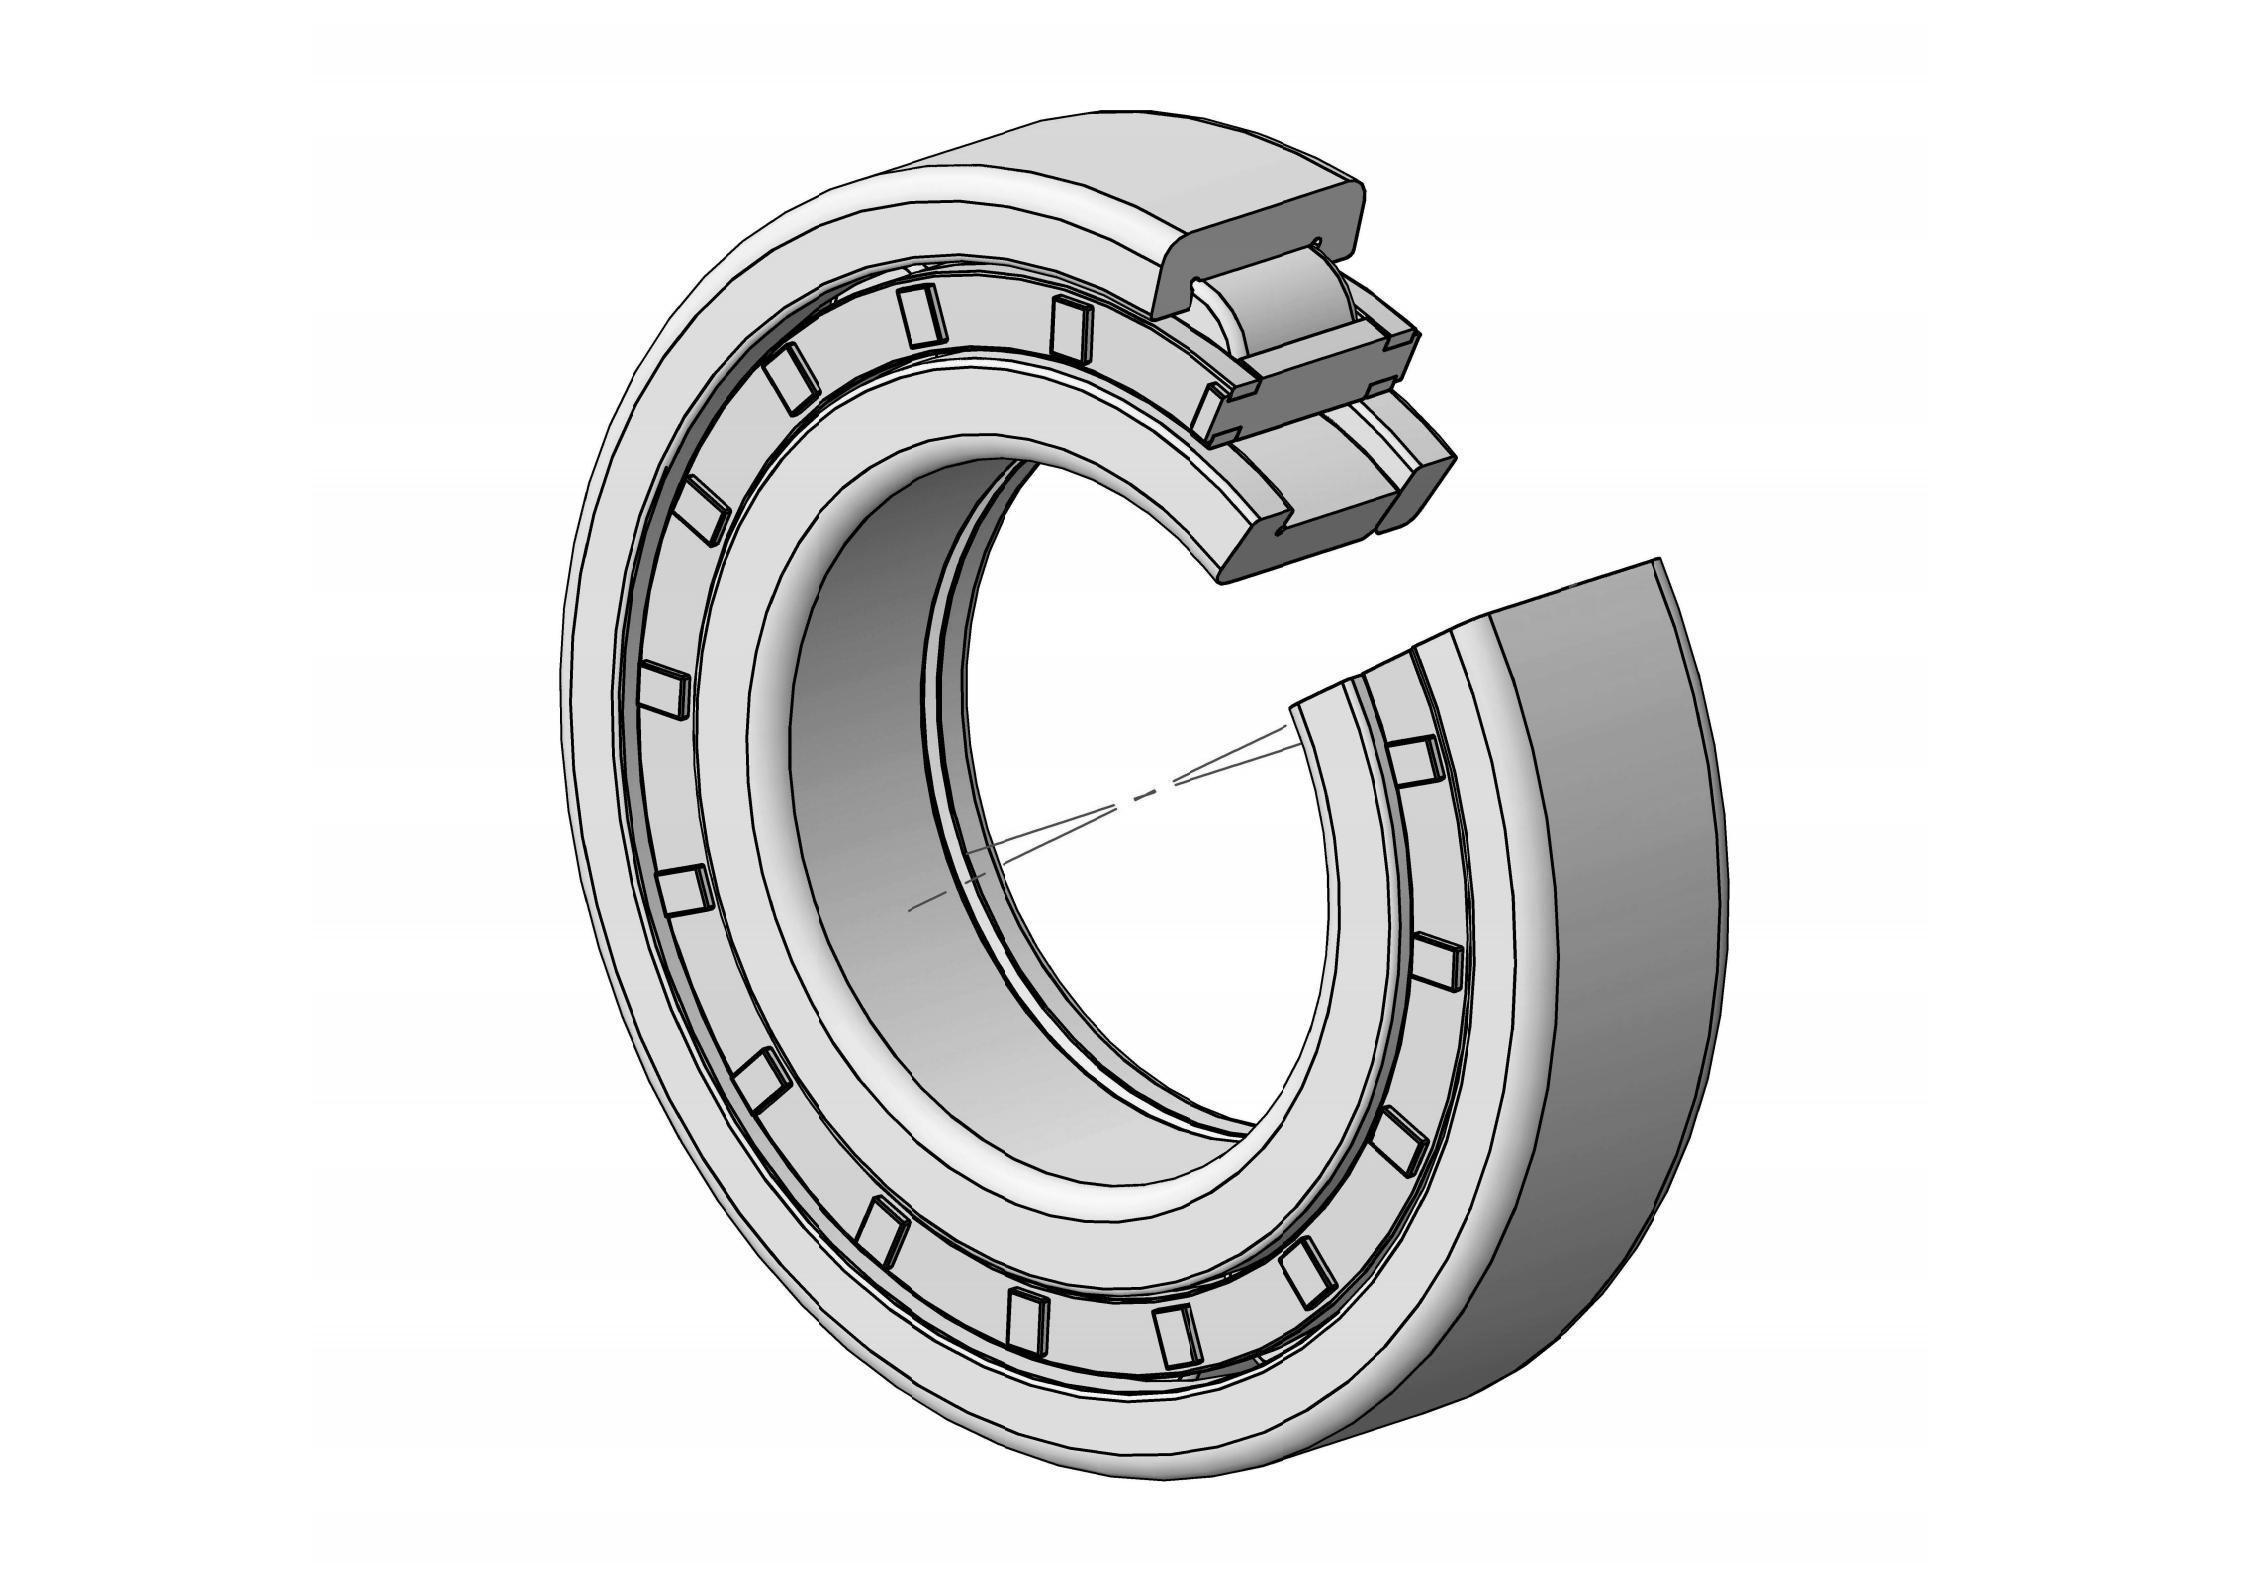 NUP2220-EM Single Row Cylindrical roller bearing 